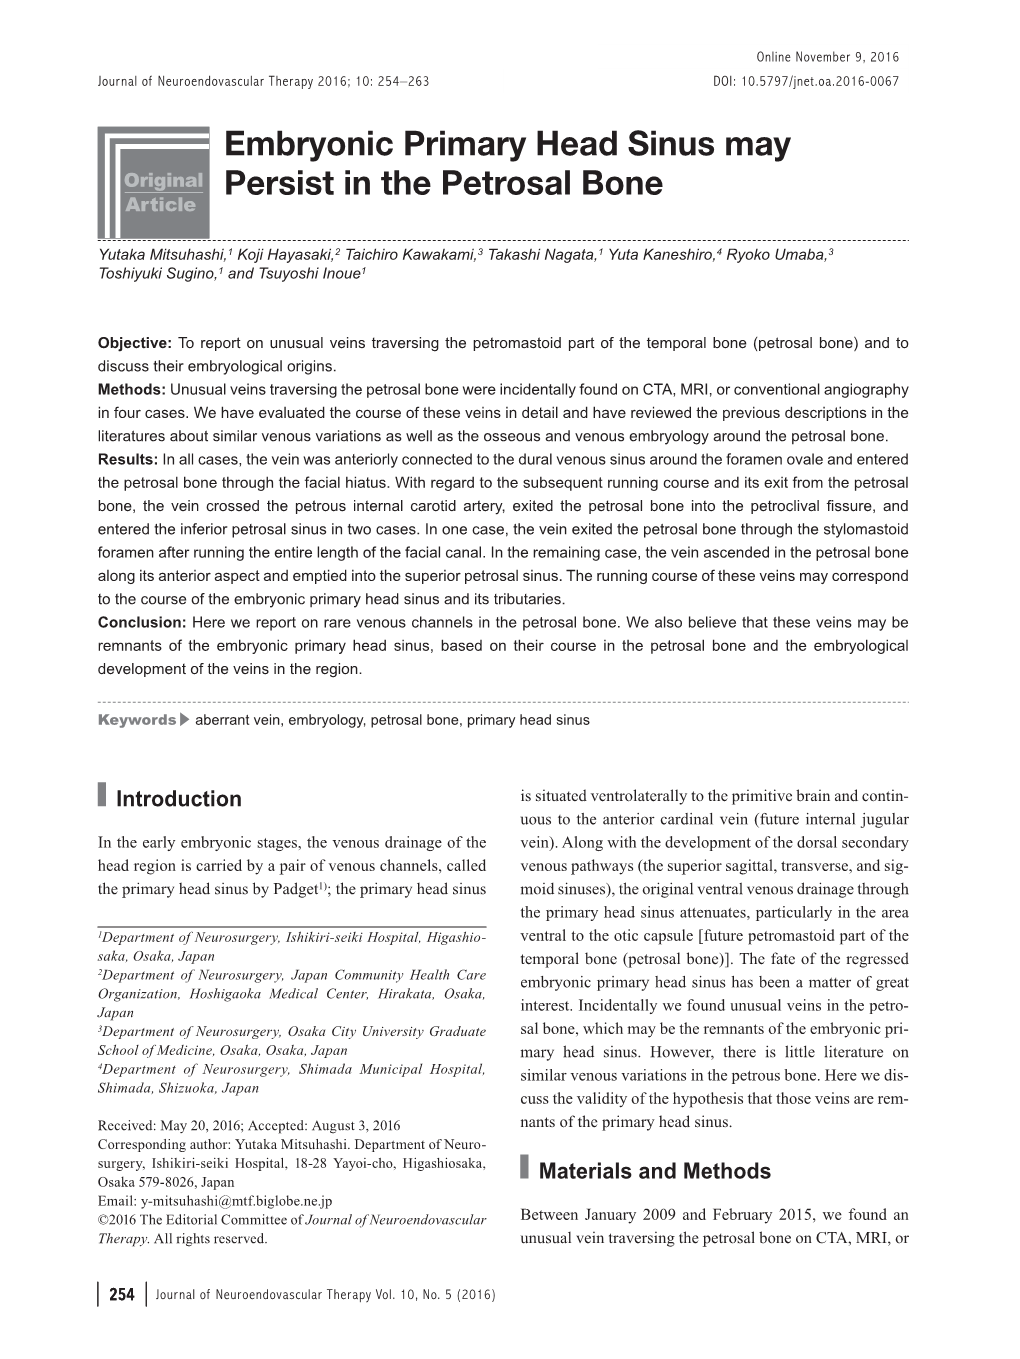 Embryonic Primary Head Sinus May Persist in the Petrosal Bone